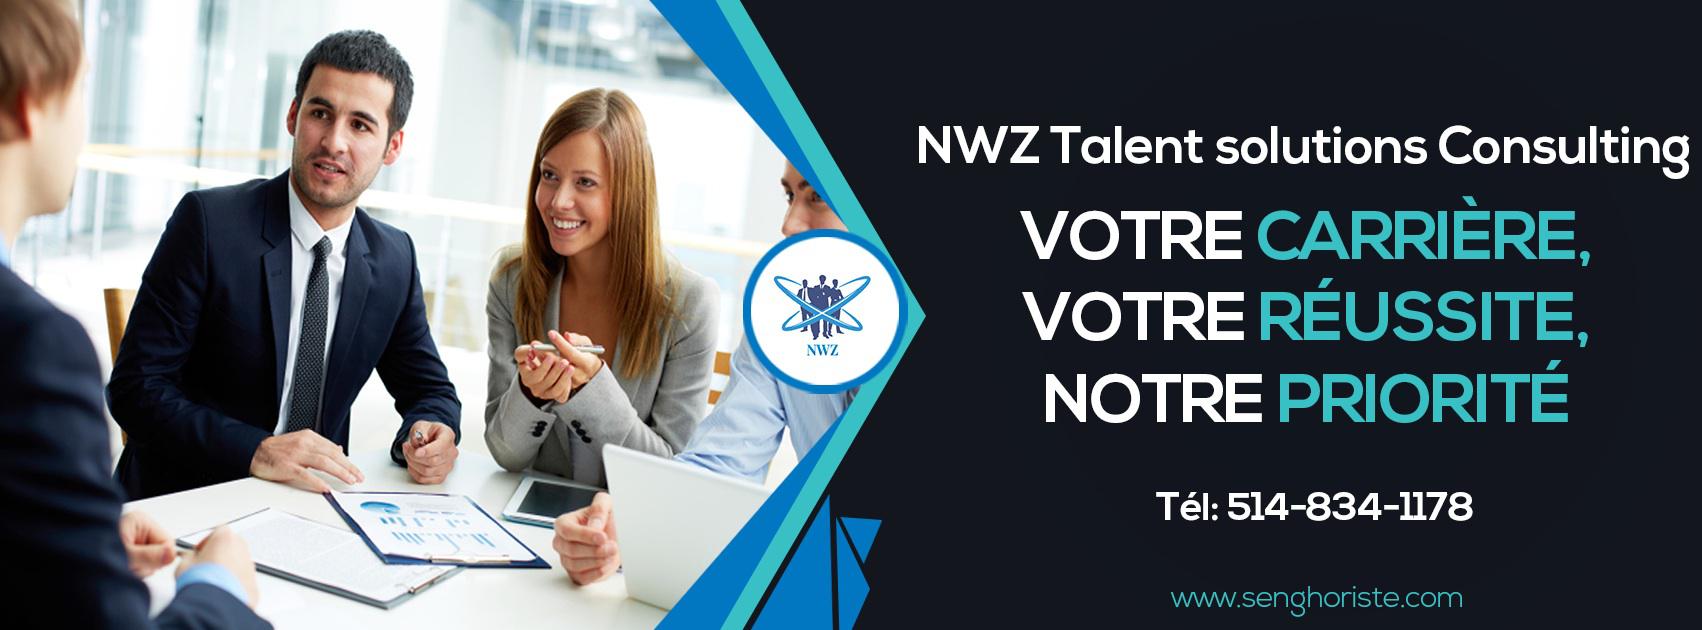 NWZ Talent Solutions Consulting Logo